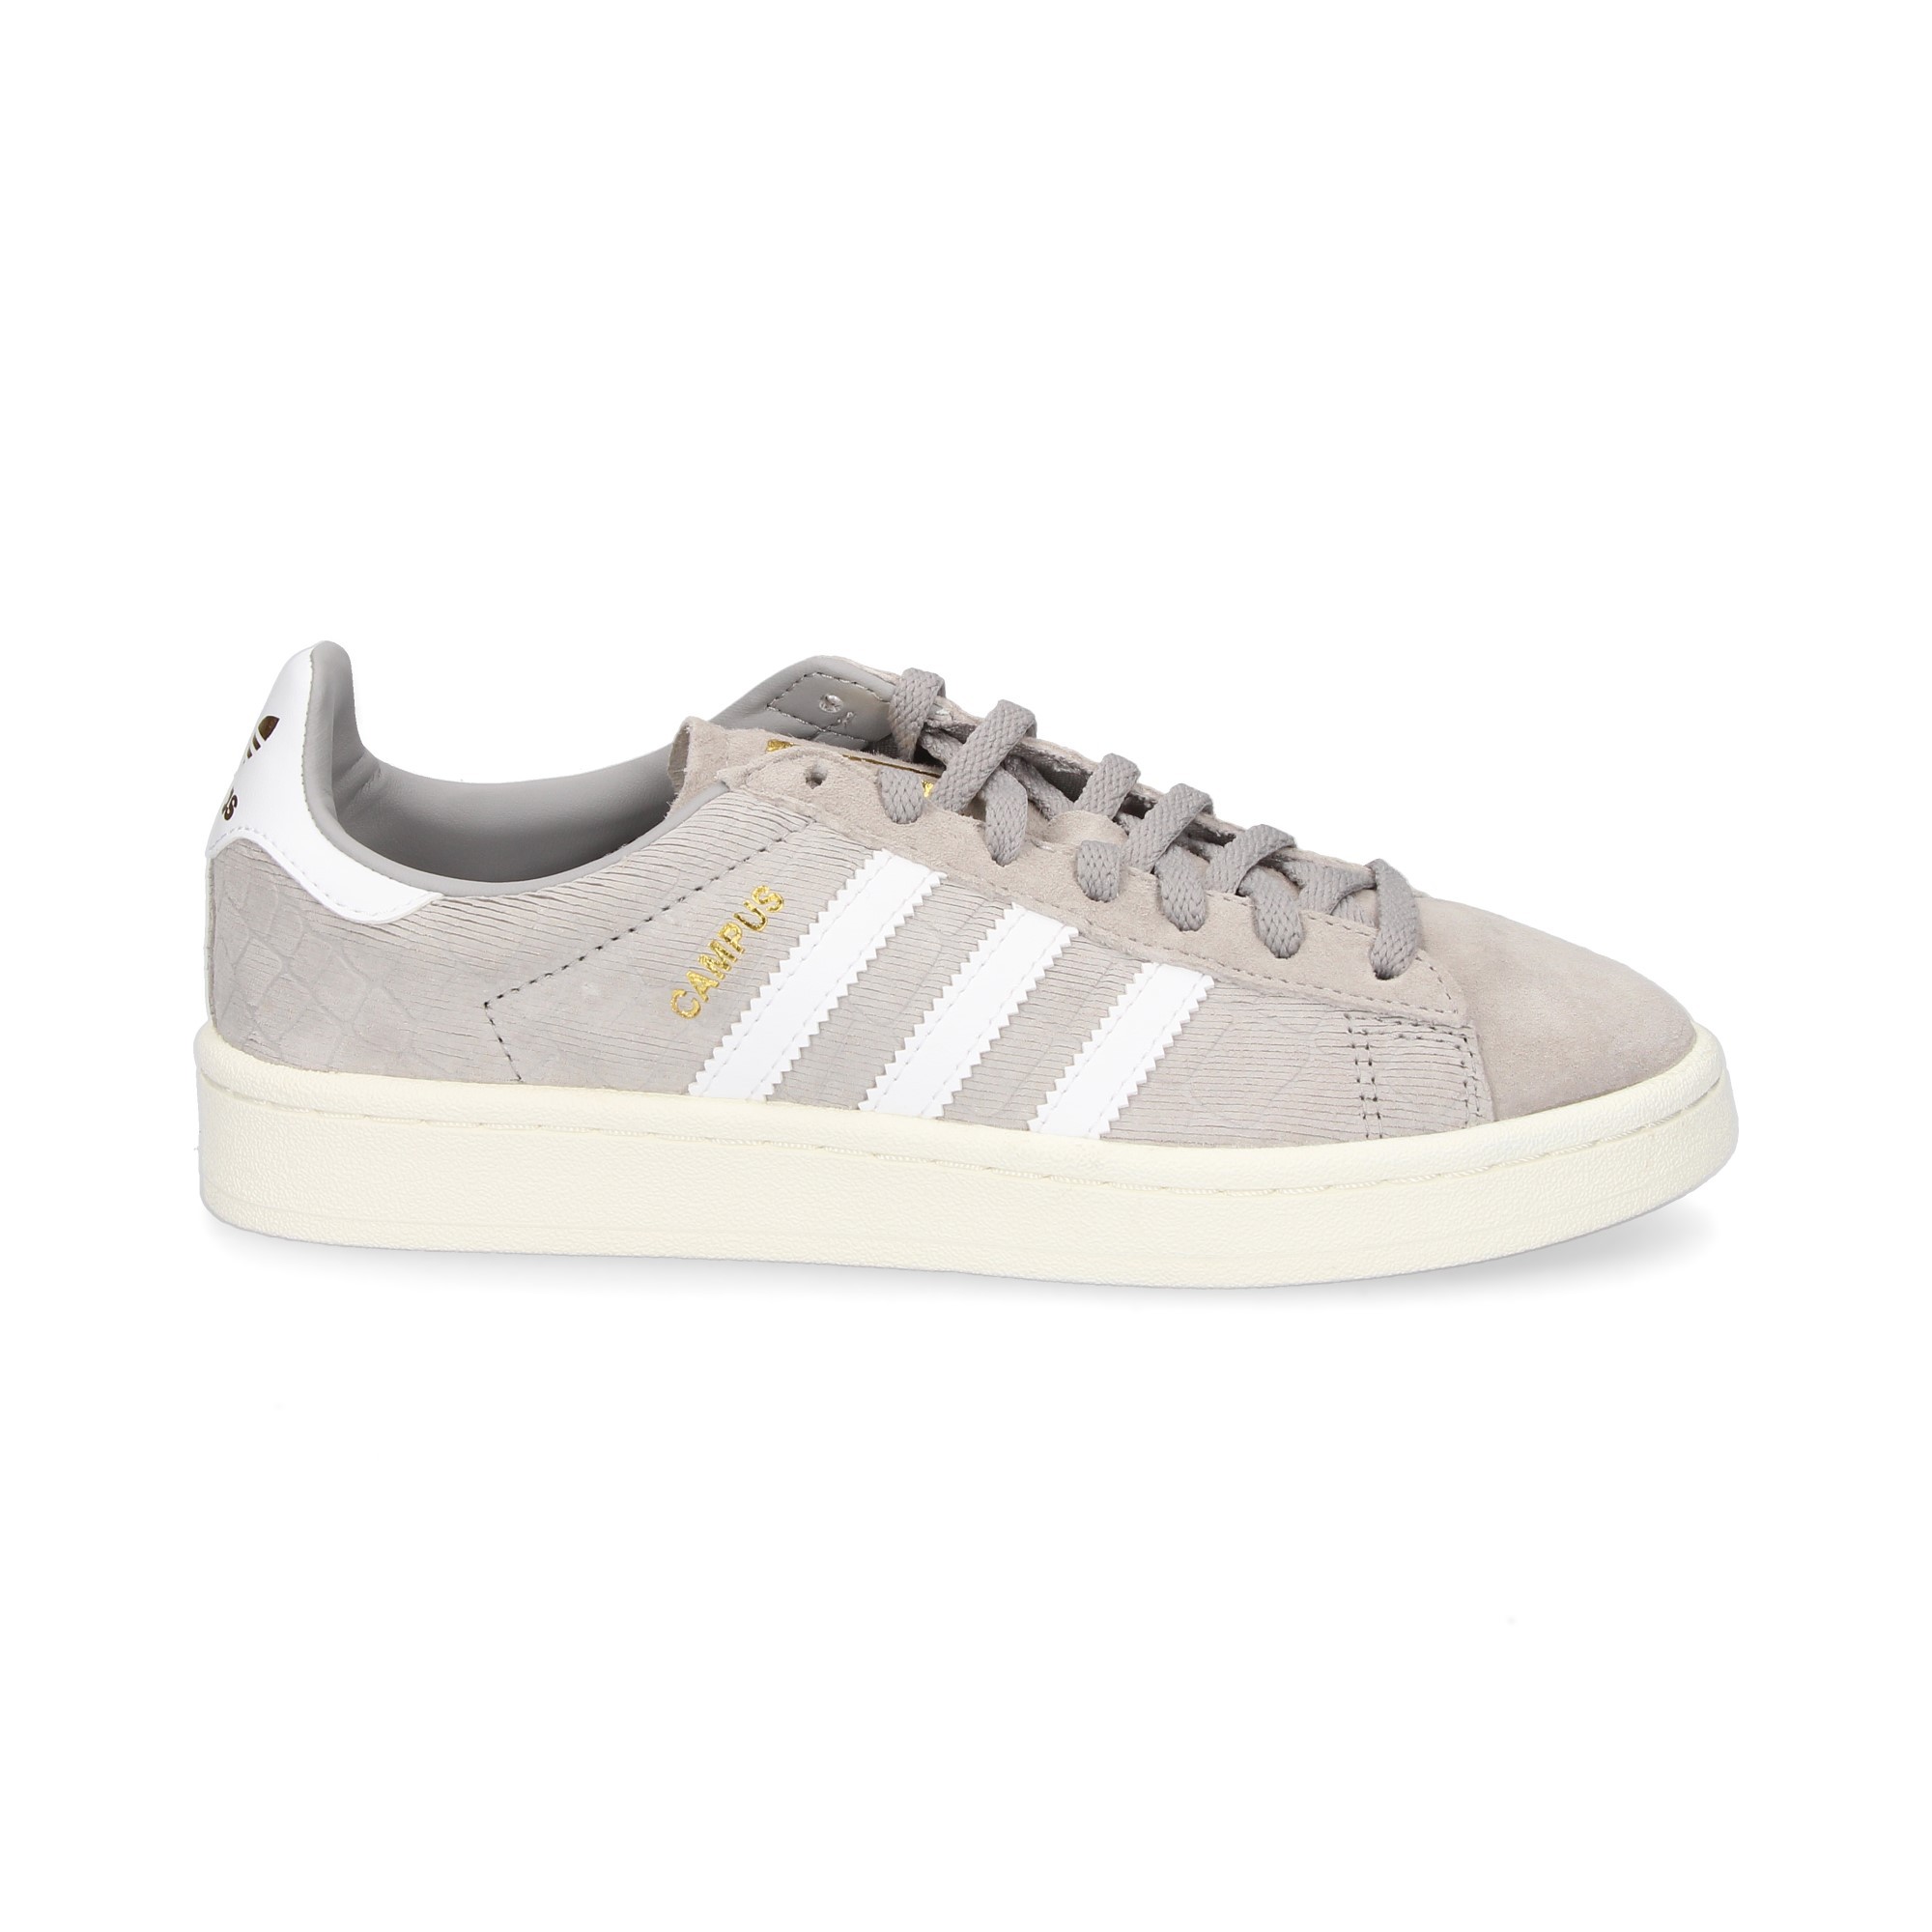 ADIDAS Women's Sneakers CAMPUS GRIS PURO MGH